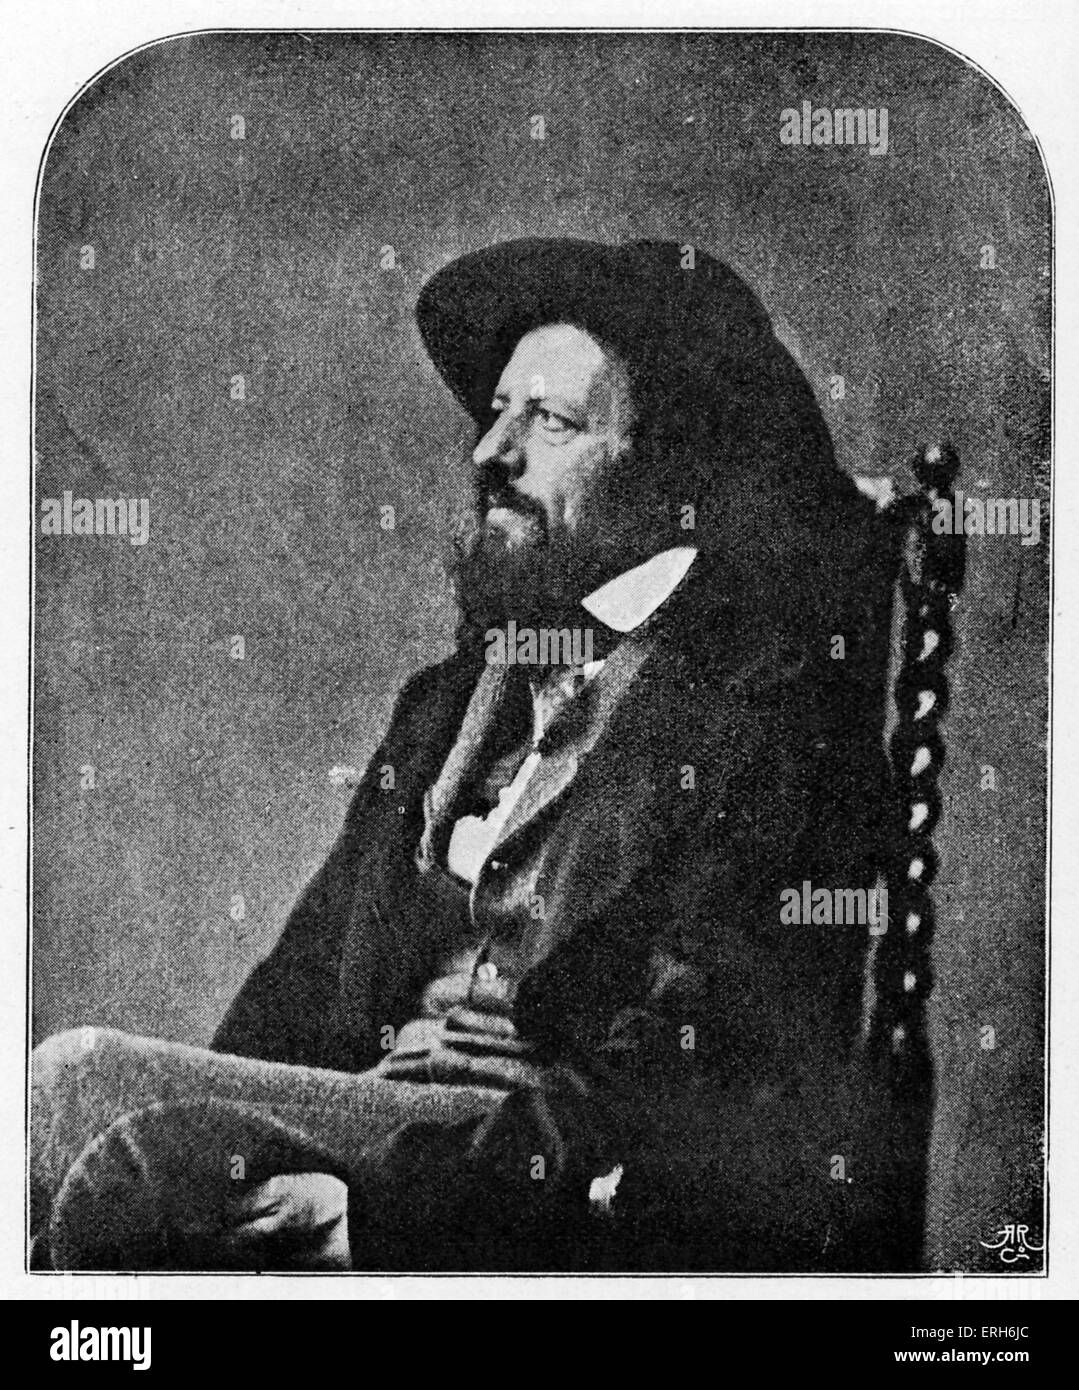 Alfred  Lord Tennyson - after photograph by Lewis Carroll.     ALT: English poet and former poet laureate 6 August 1809 – 6 Stock Photo